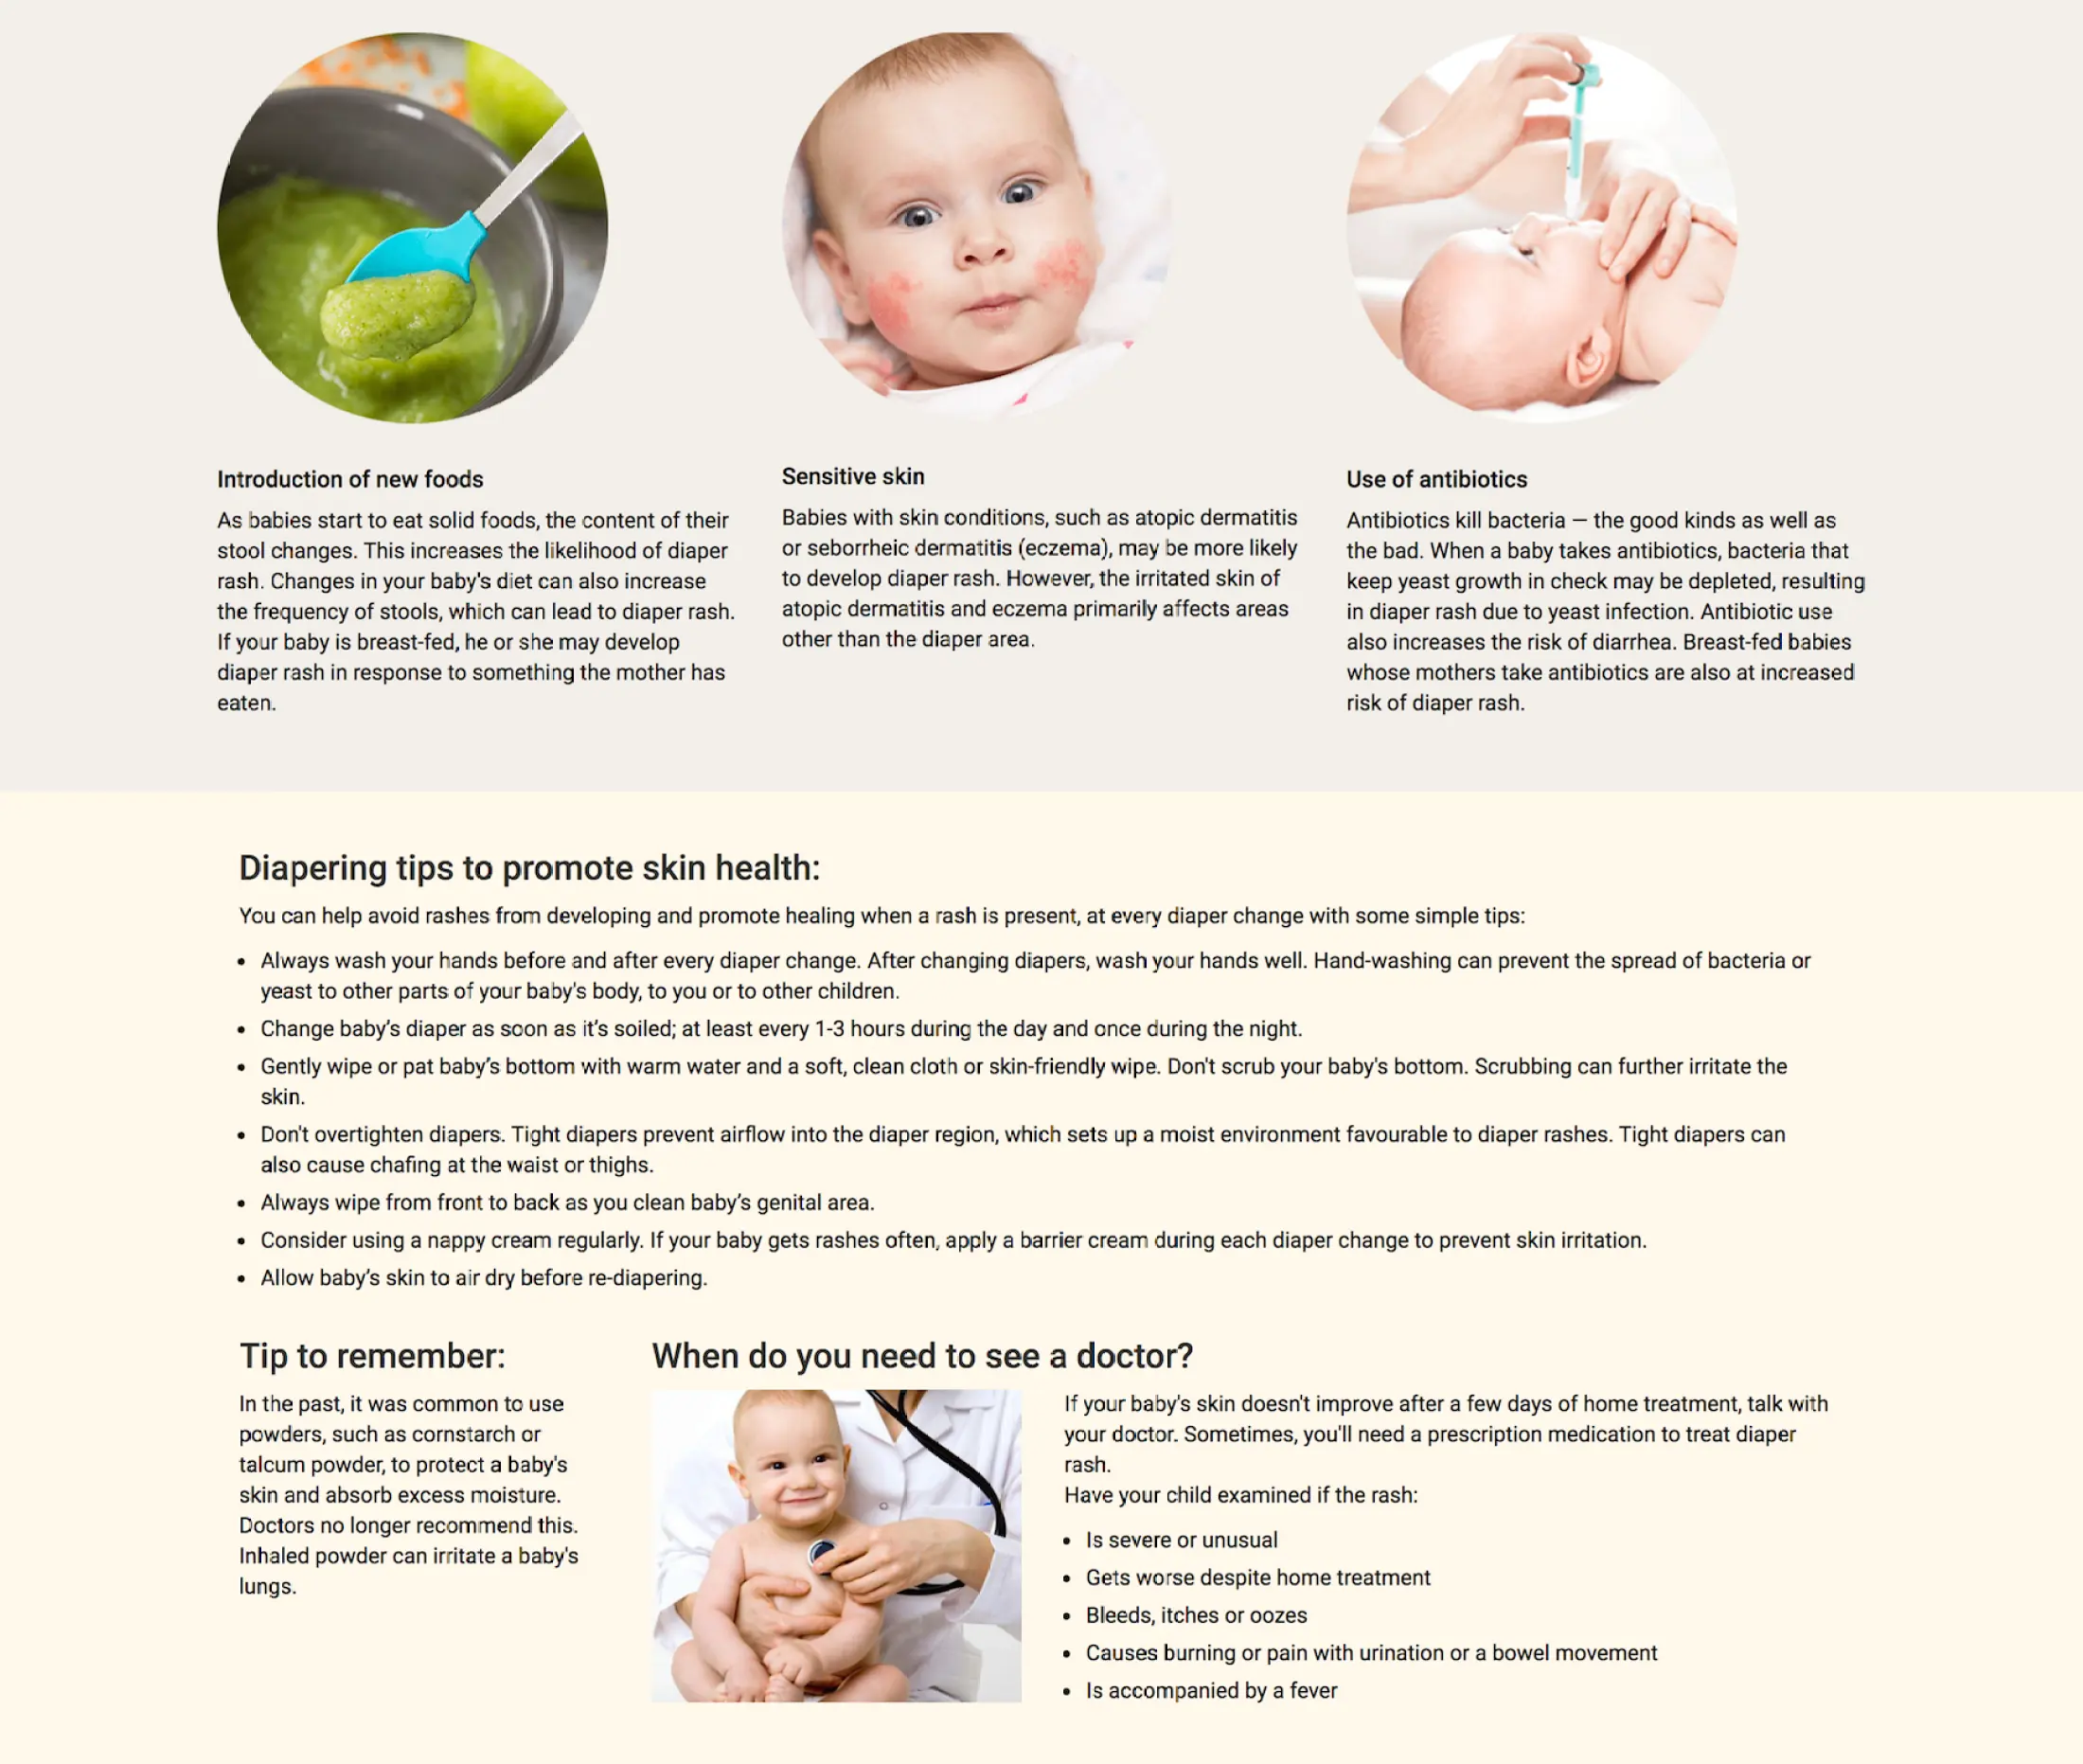 Applecrumby™ offers only premium, safe, natural and organic baby essentials